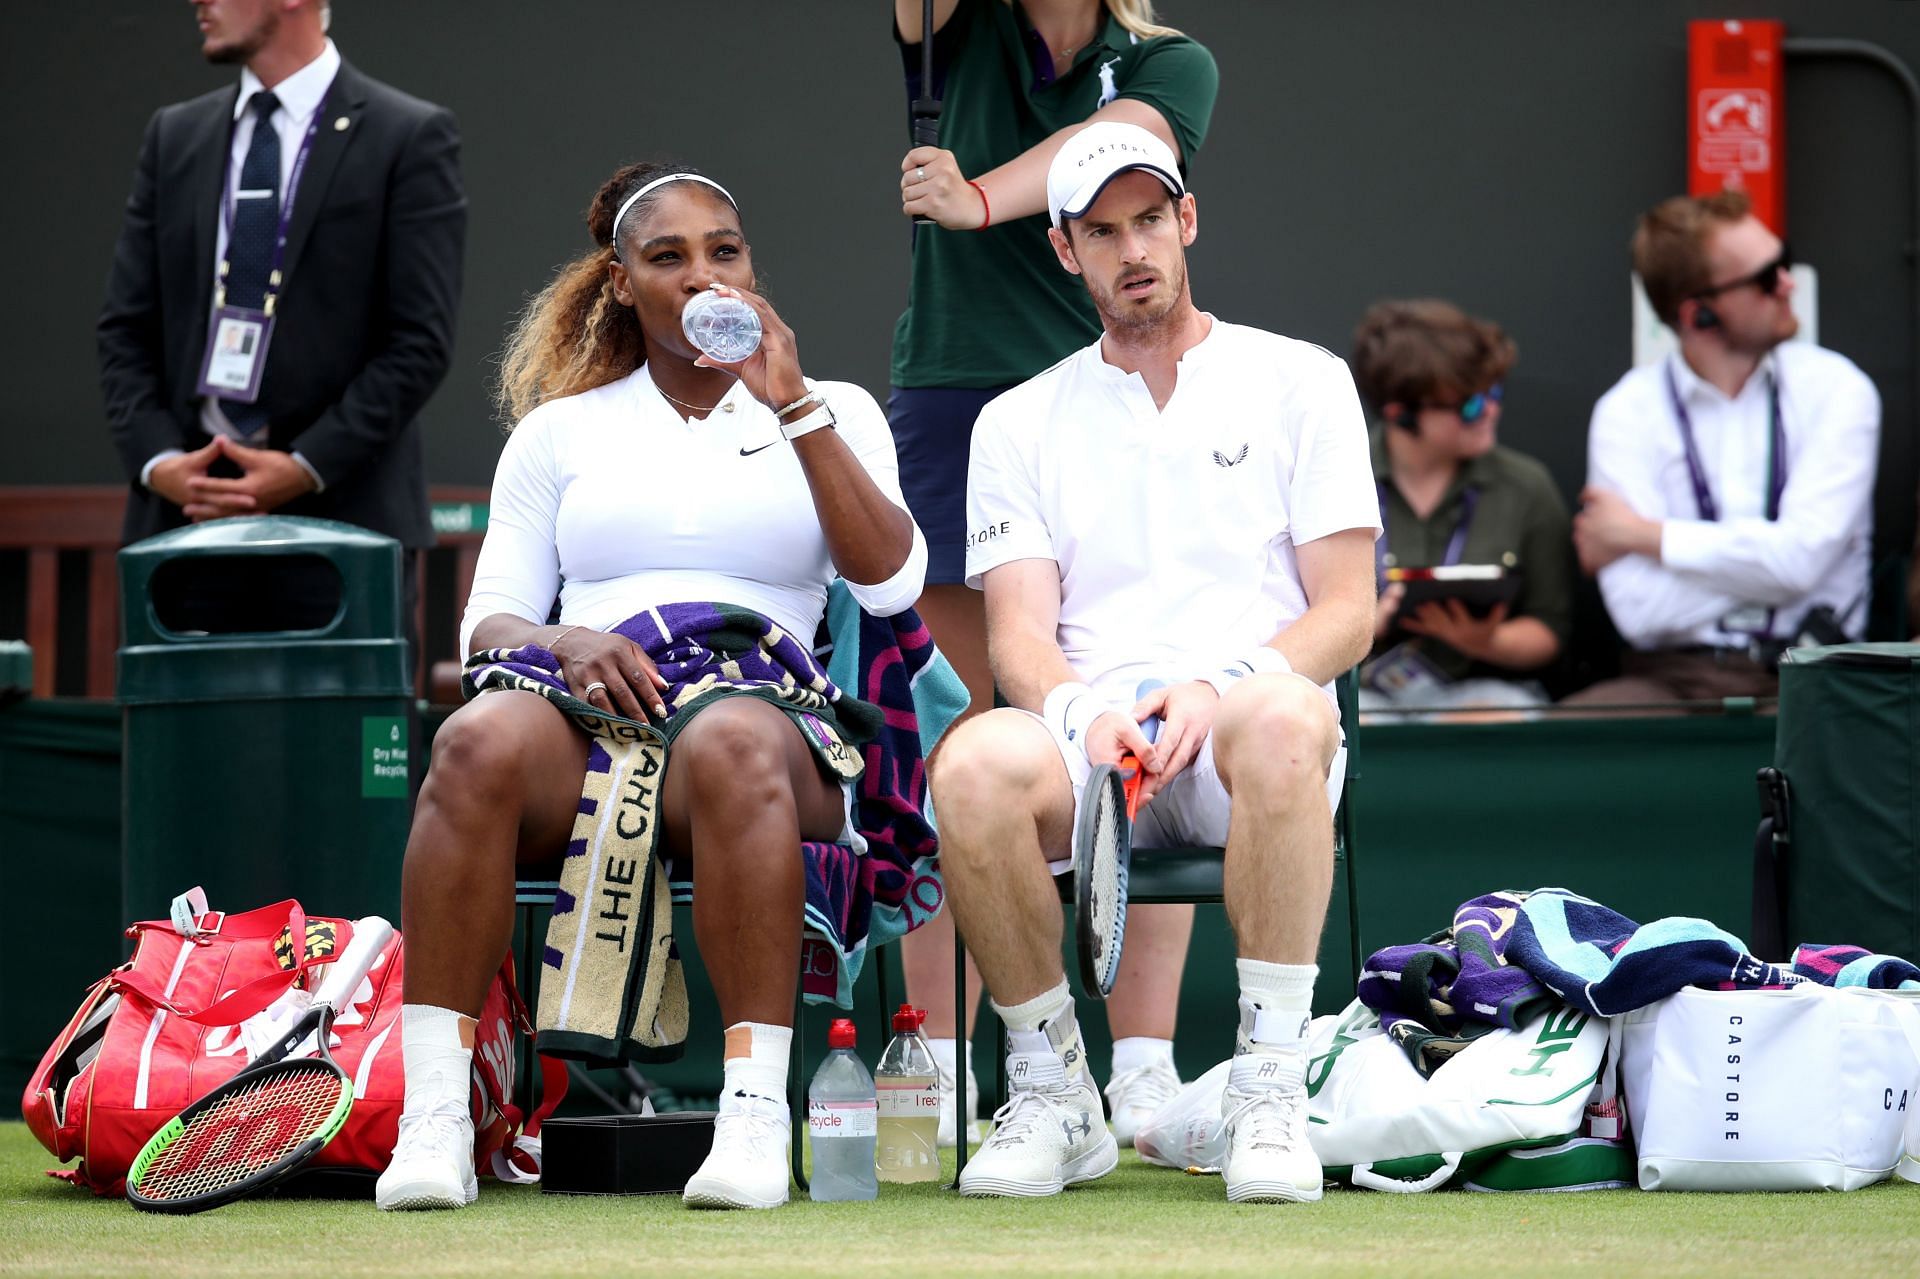 Serena Williams and Andy Murray played doubles at Wimbledon 2019